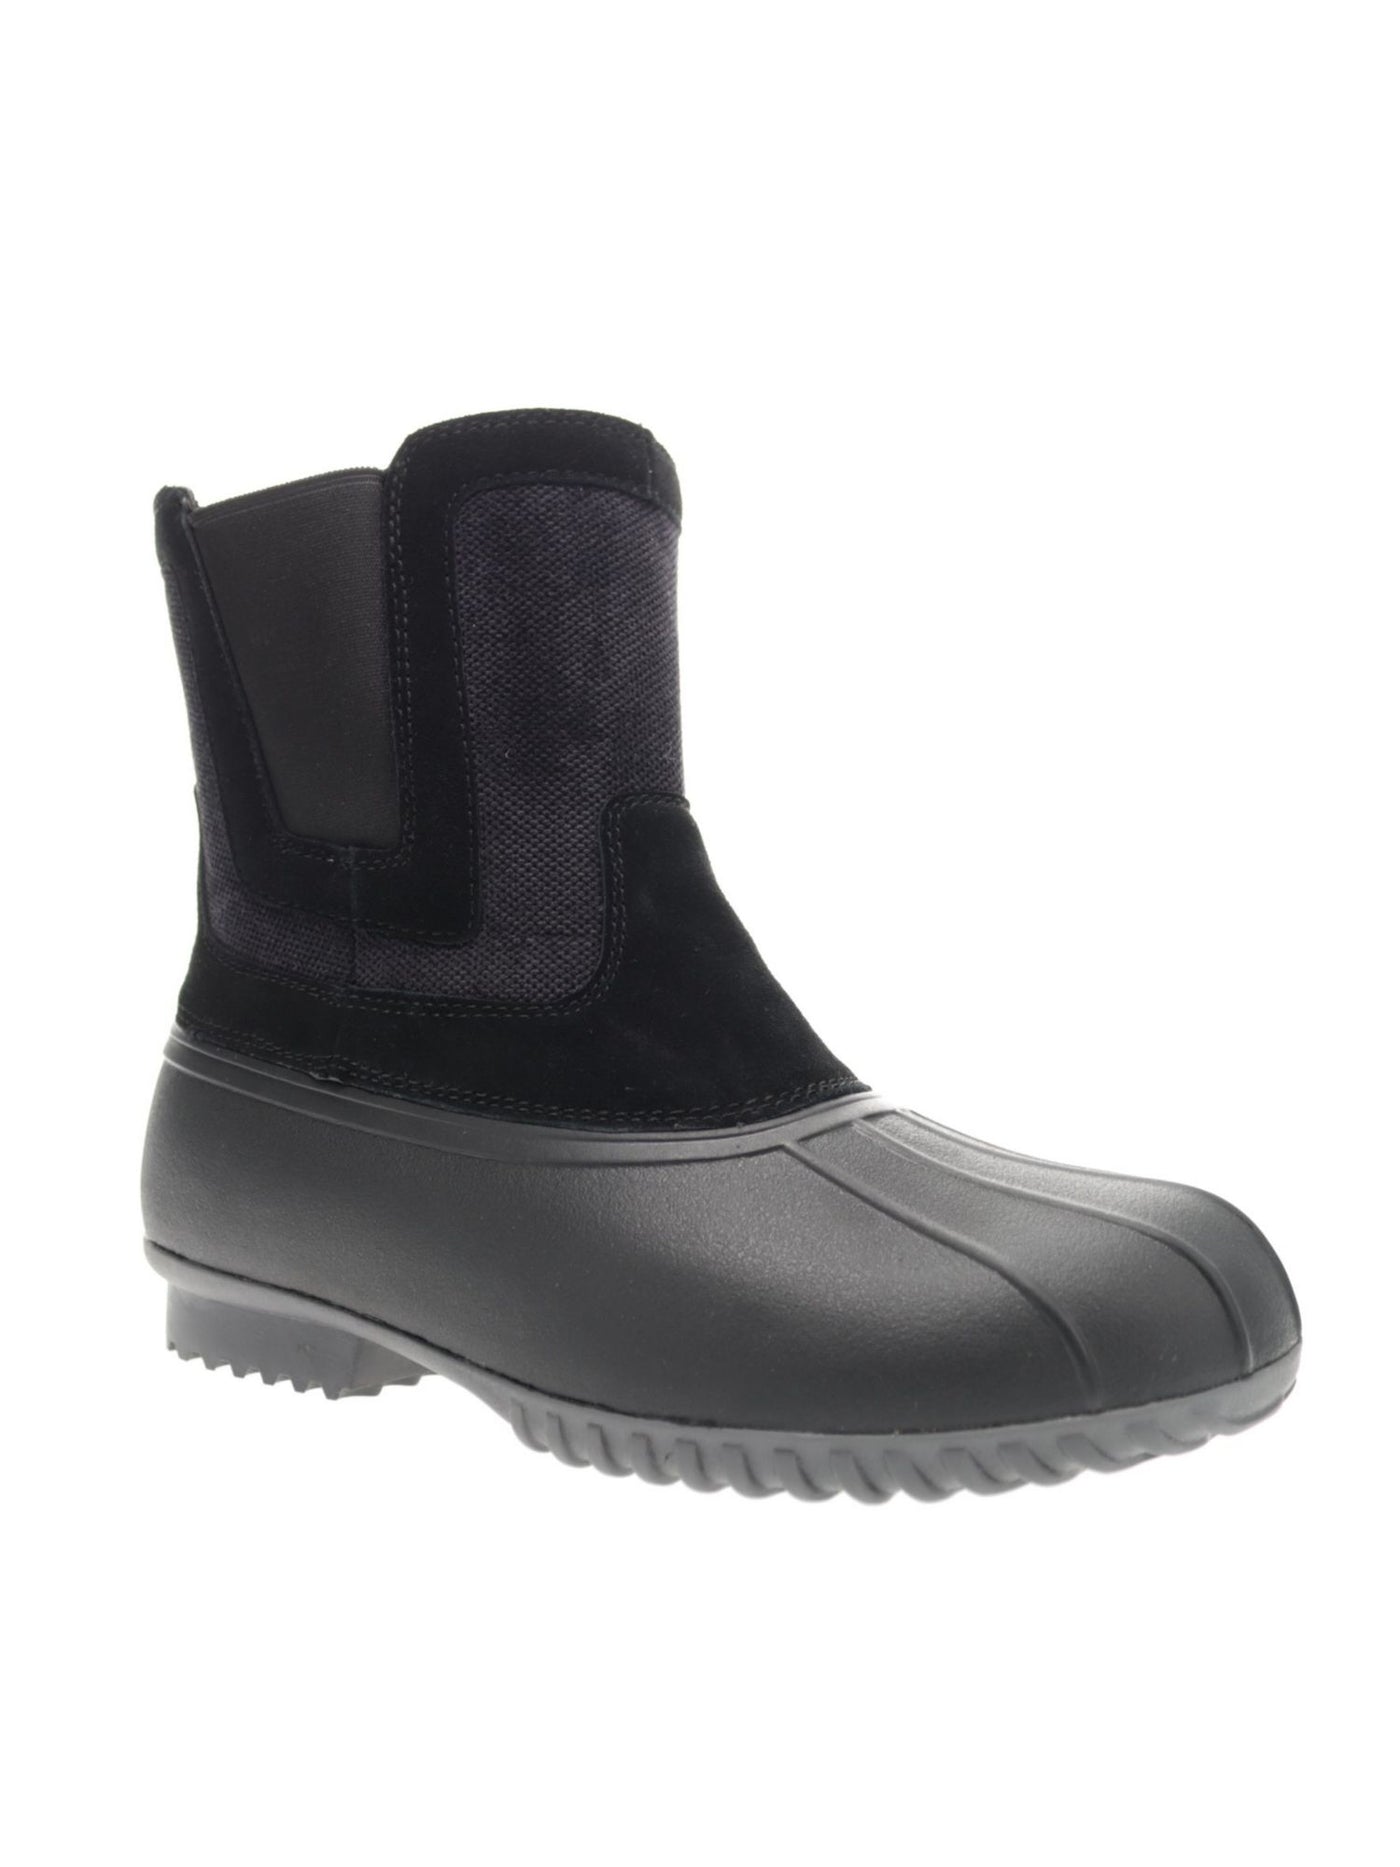 PROPET Womens Black Goring Waterproof Padded Insley Round Toe Zip-Up Leather Duck Boots 12 2E